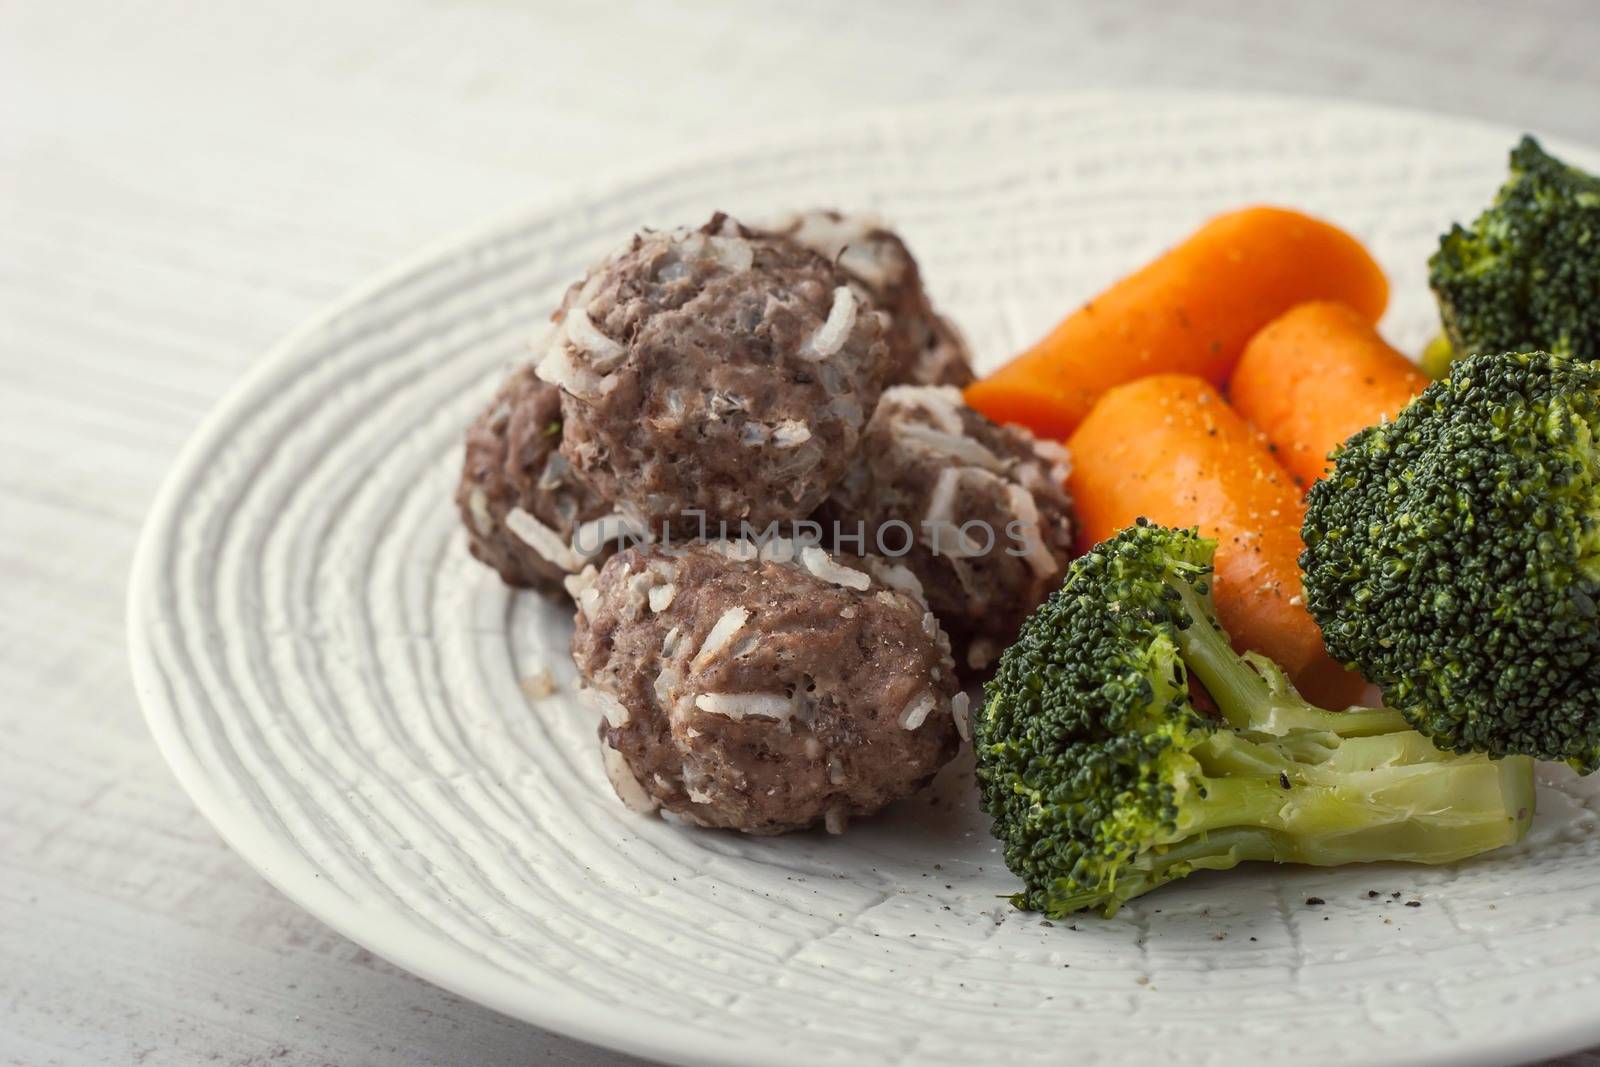 Broccoli and carrots with meatballs on the white plate horizontal